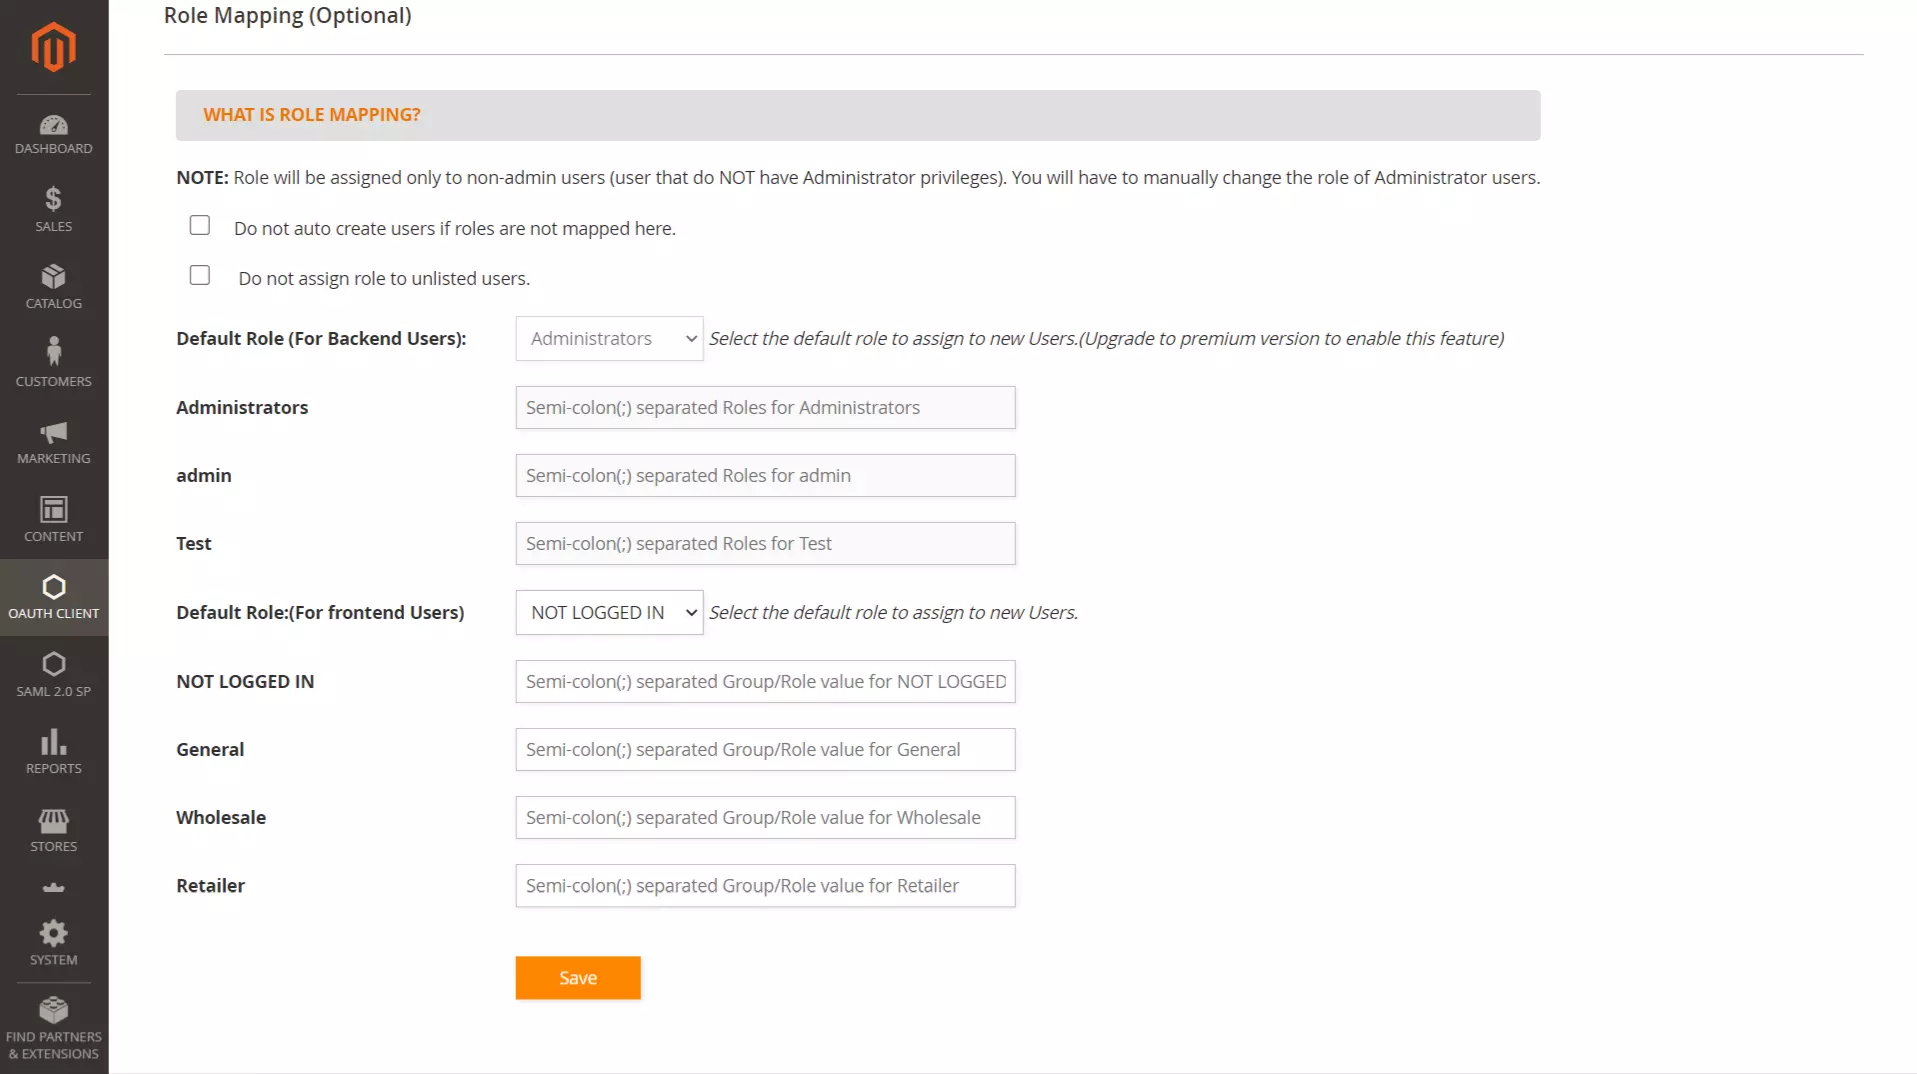 WSO2 Magento SSO - WSO2 Single Sign-On(SSO) Login in Magento - role mapping